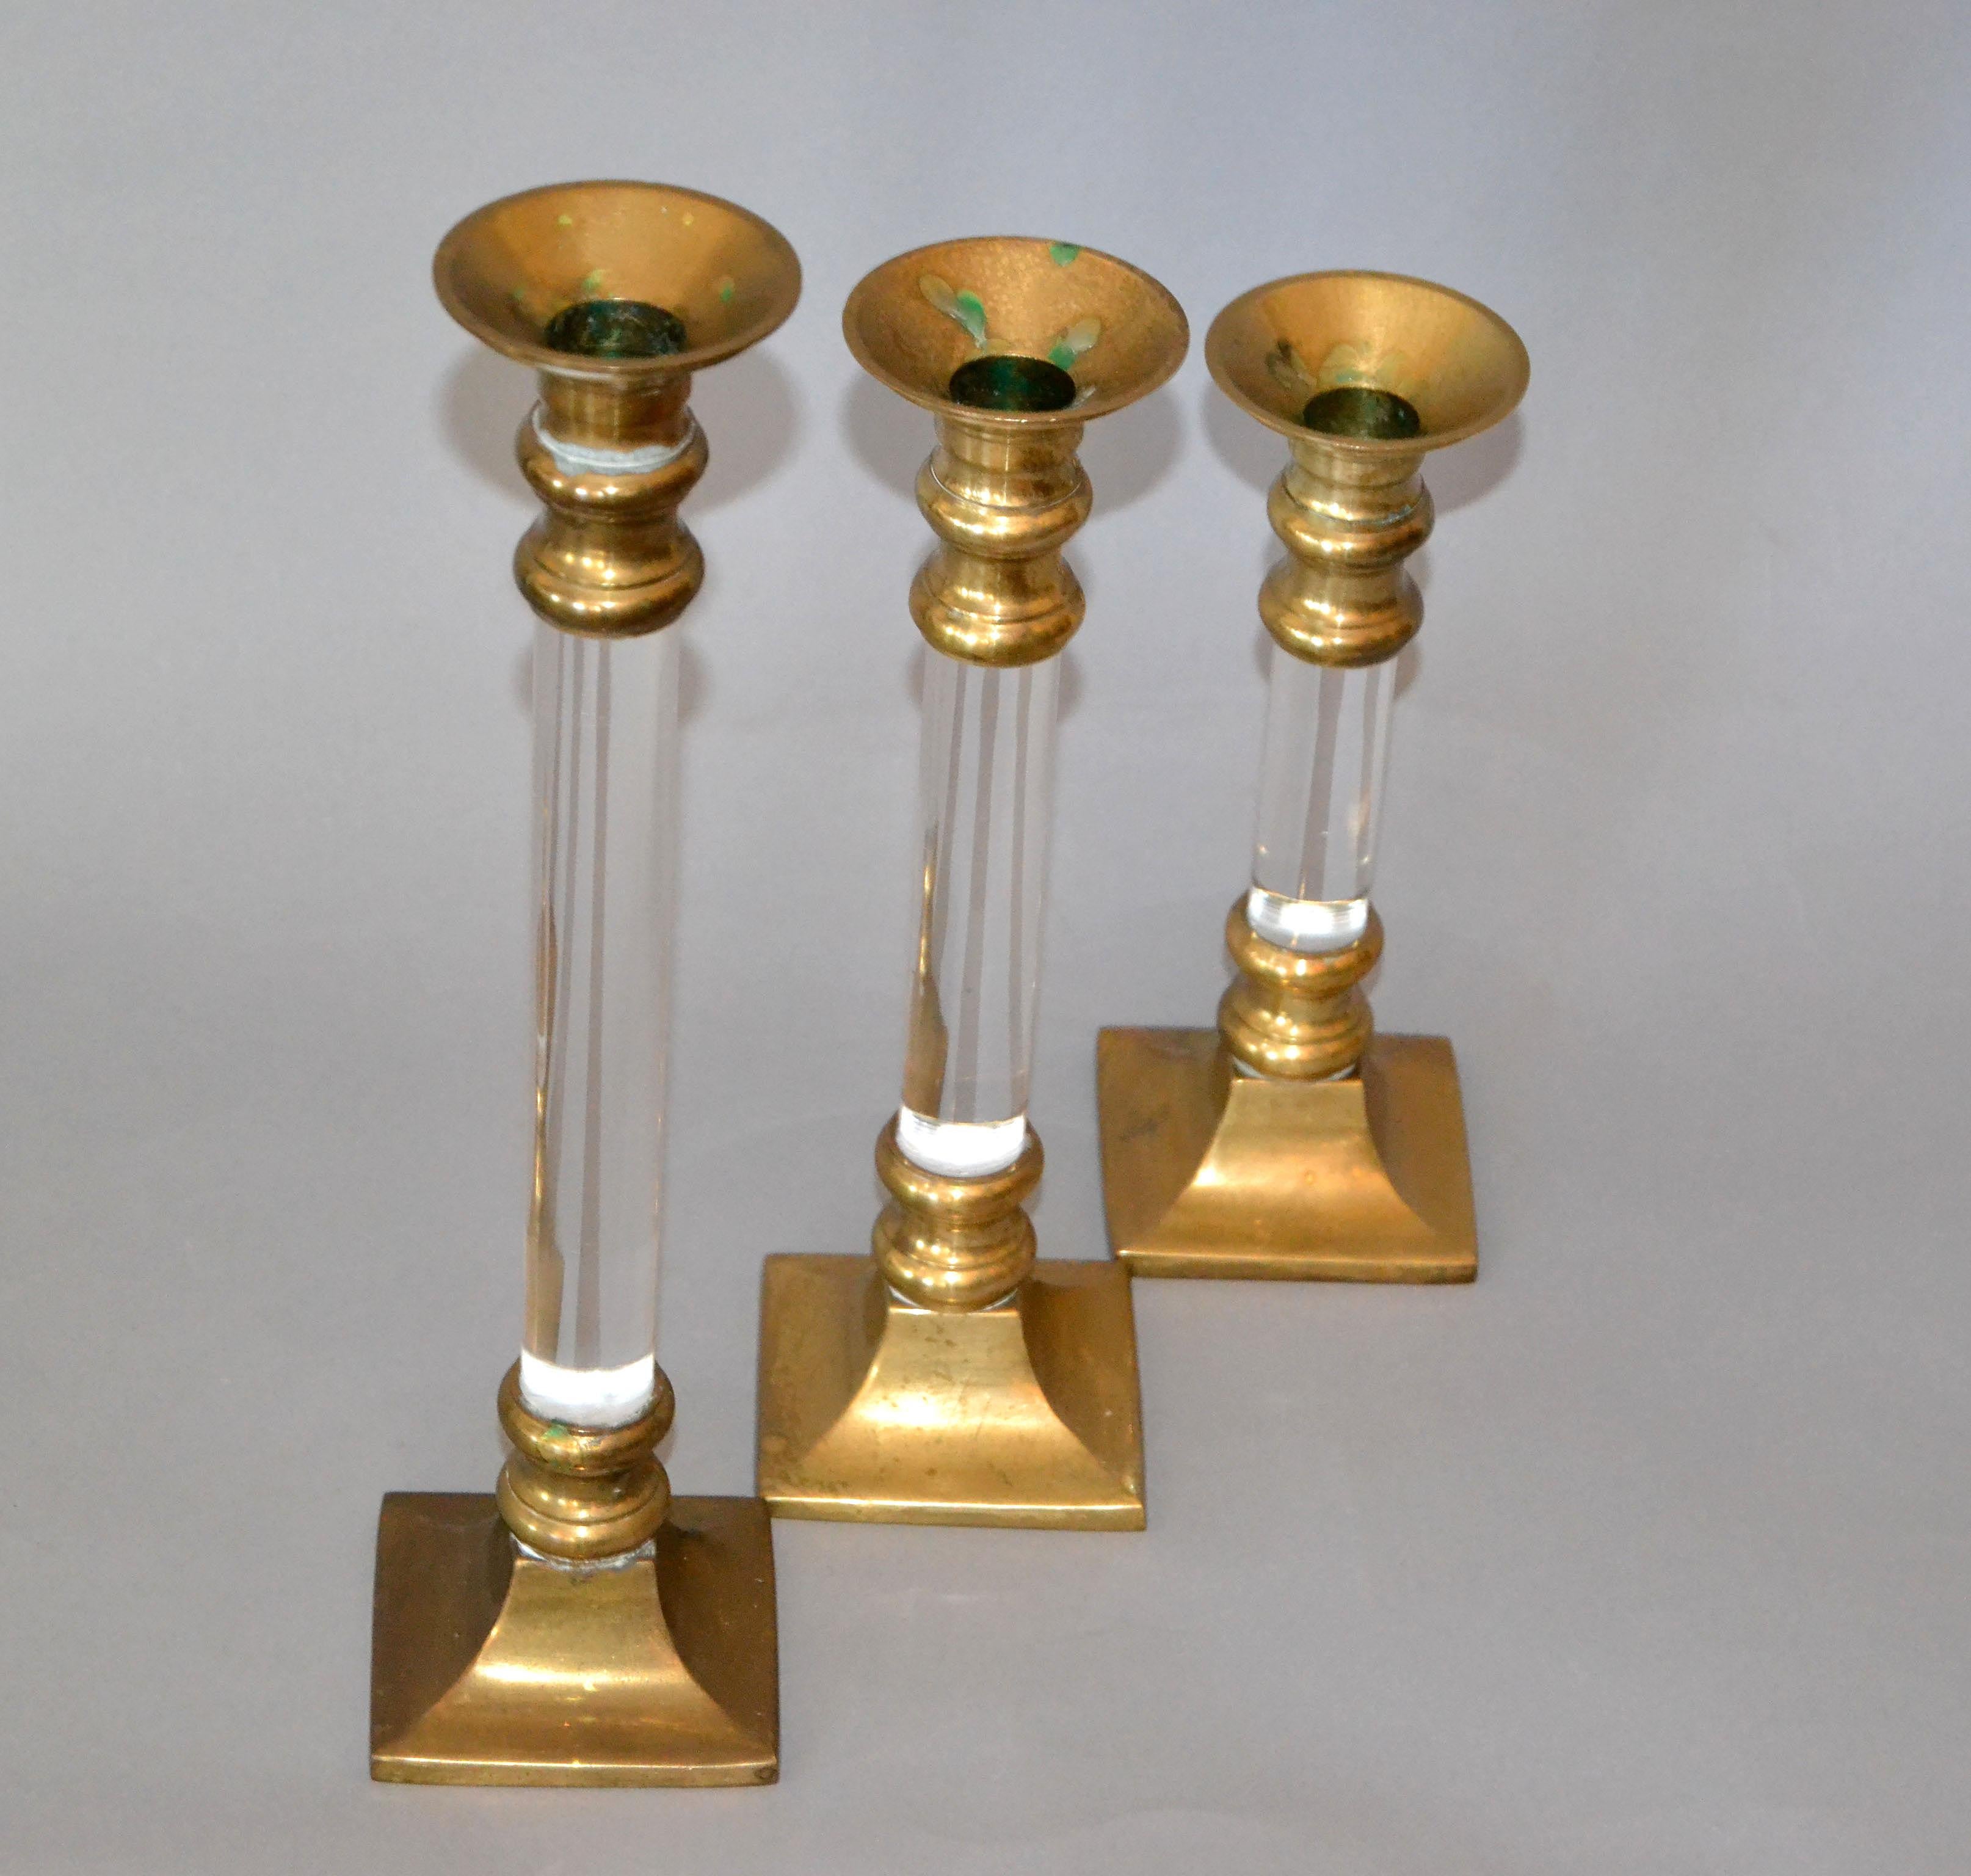 Set of three Mid-Century Modern Lucite and brass candle holders or candlesticks.
The set is very old and we intentionally left the brass in its original condition.
They come in three sizes: 12-10-8 inches height.